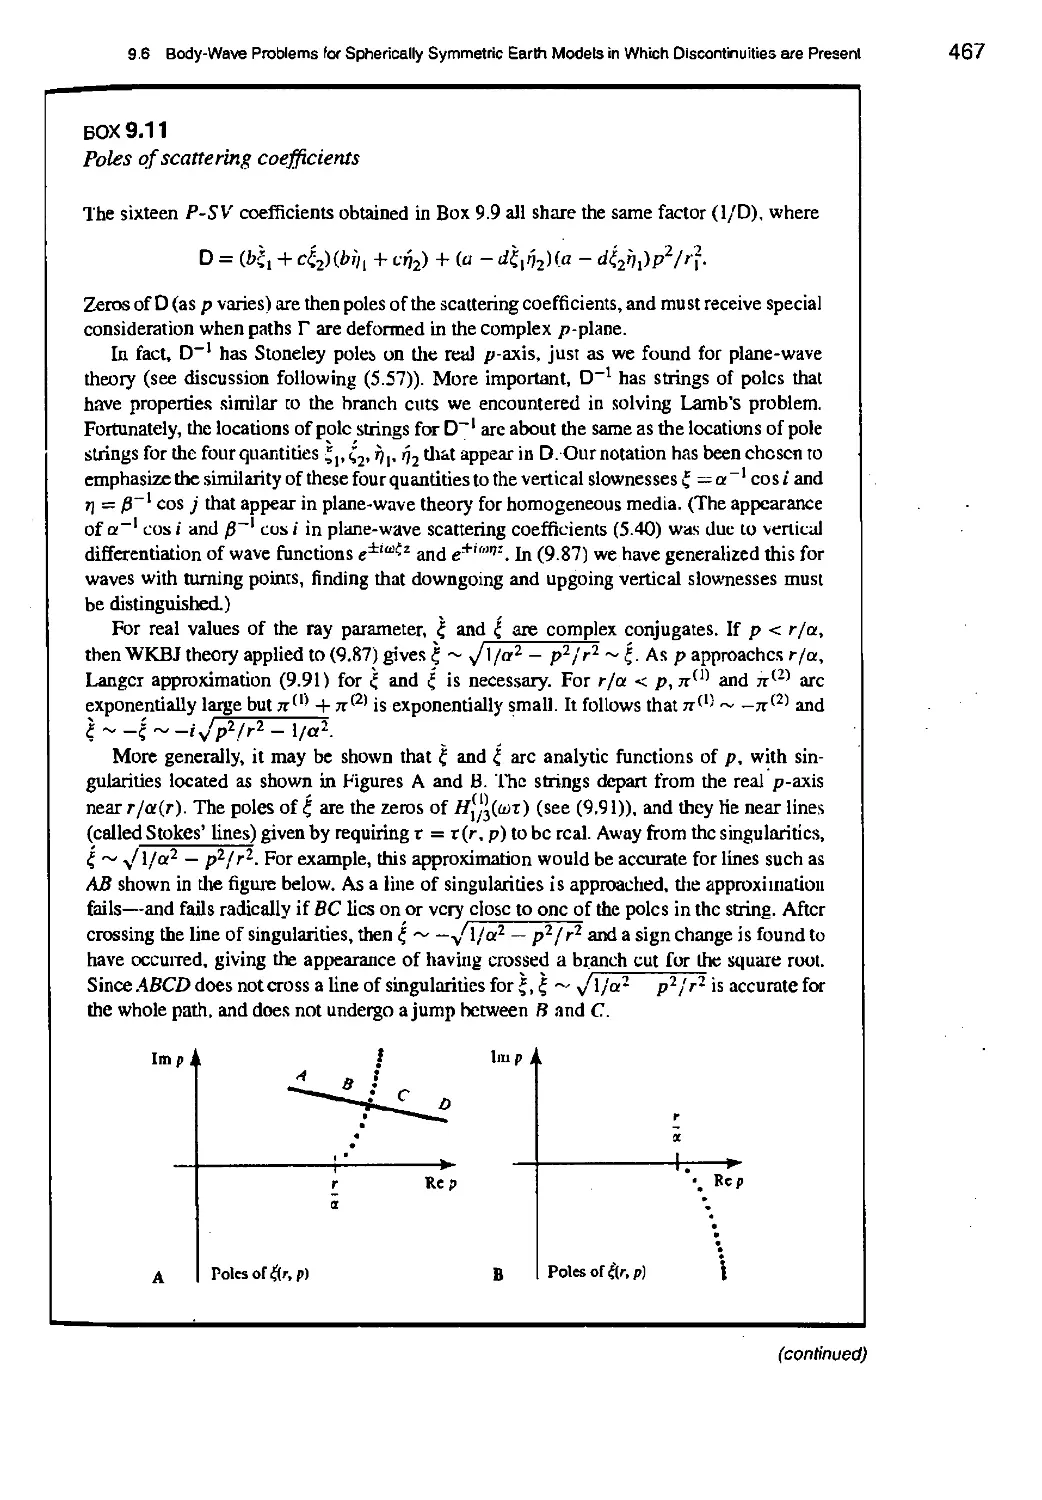 BOX 9.11 Poles of scattering coefficients